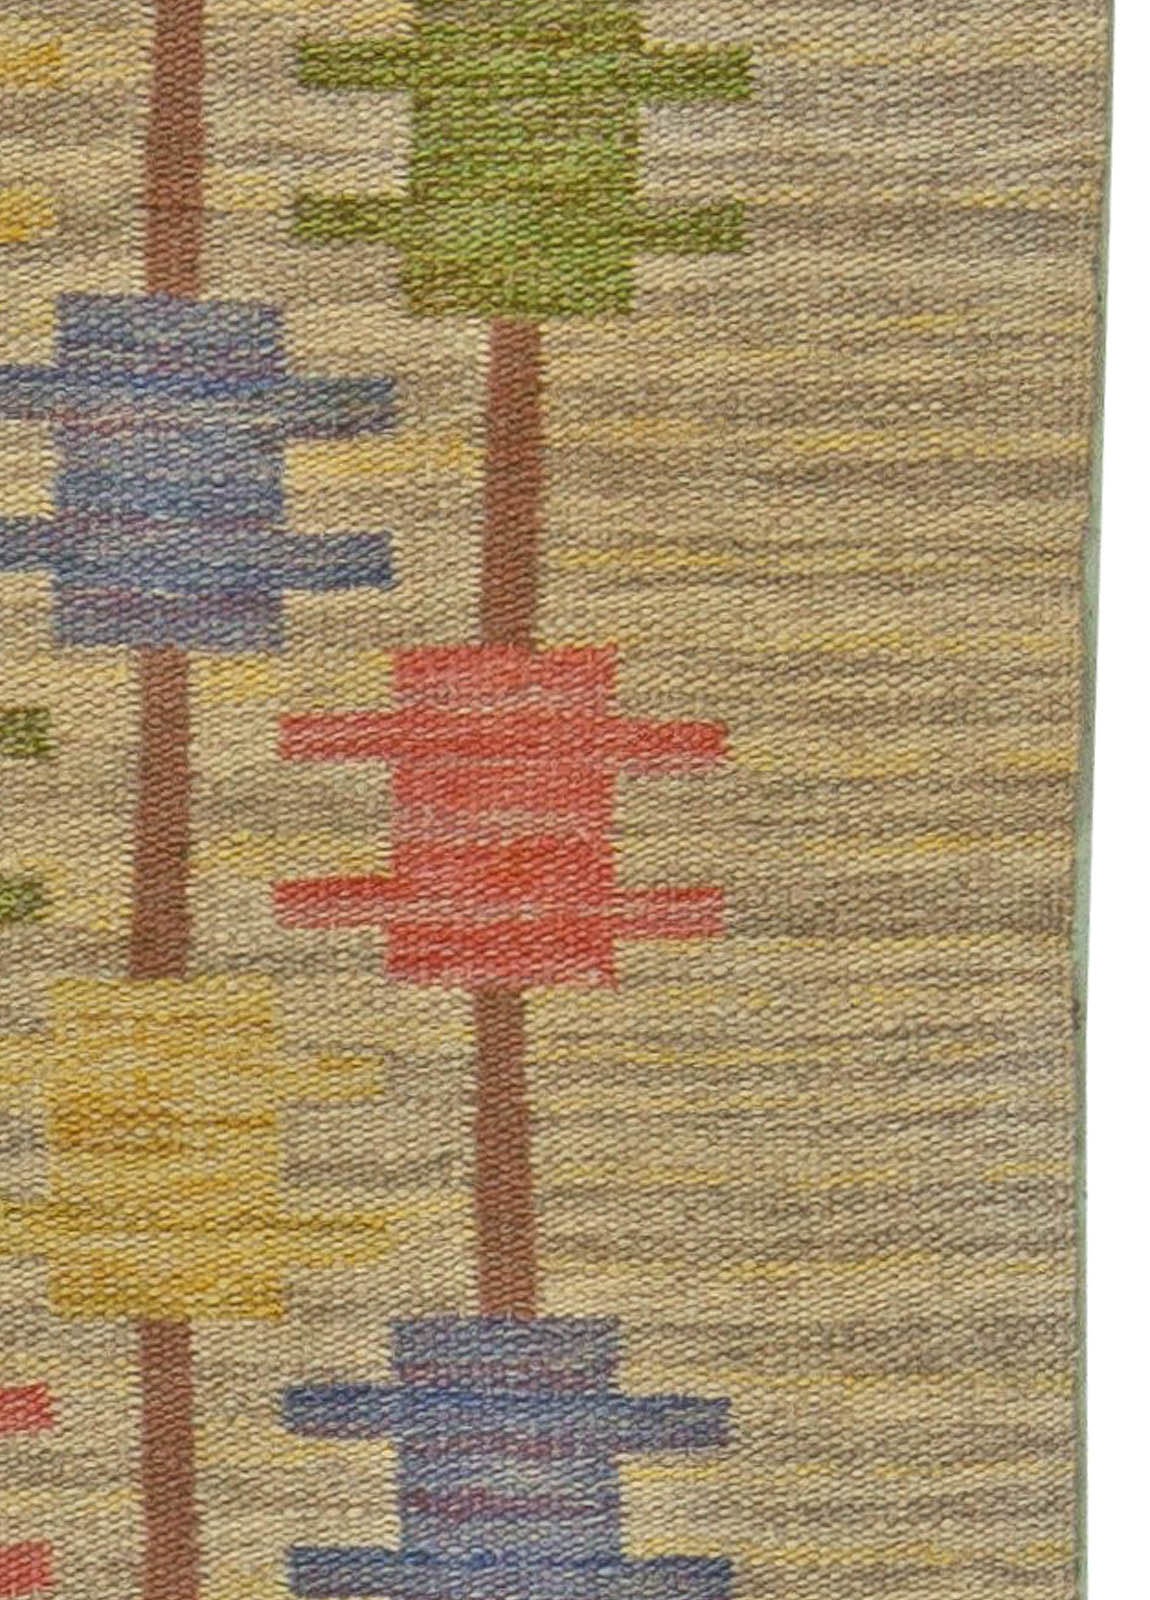 Flat-weave Scandinavian rug with playfully alternating rows of candy colored geometric shapes on a neutral background.